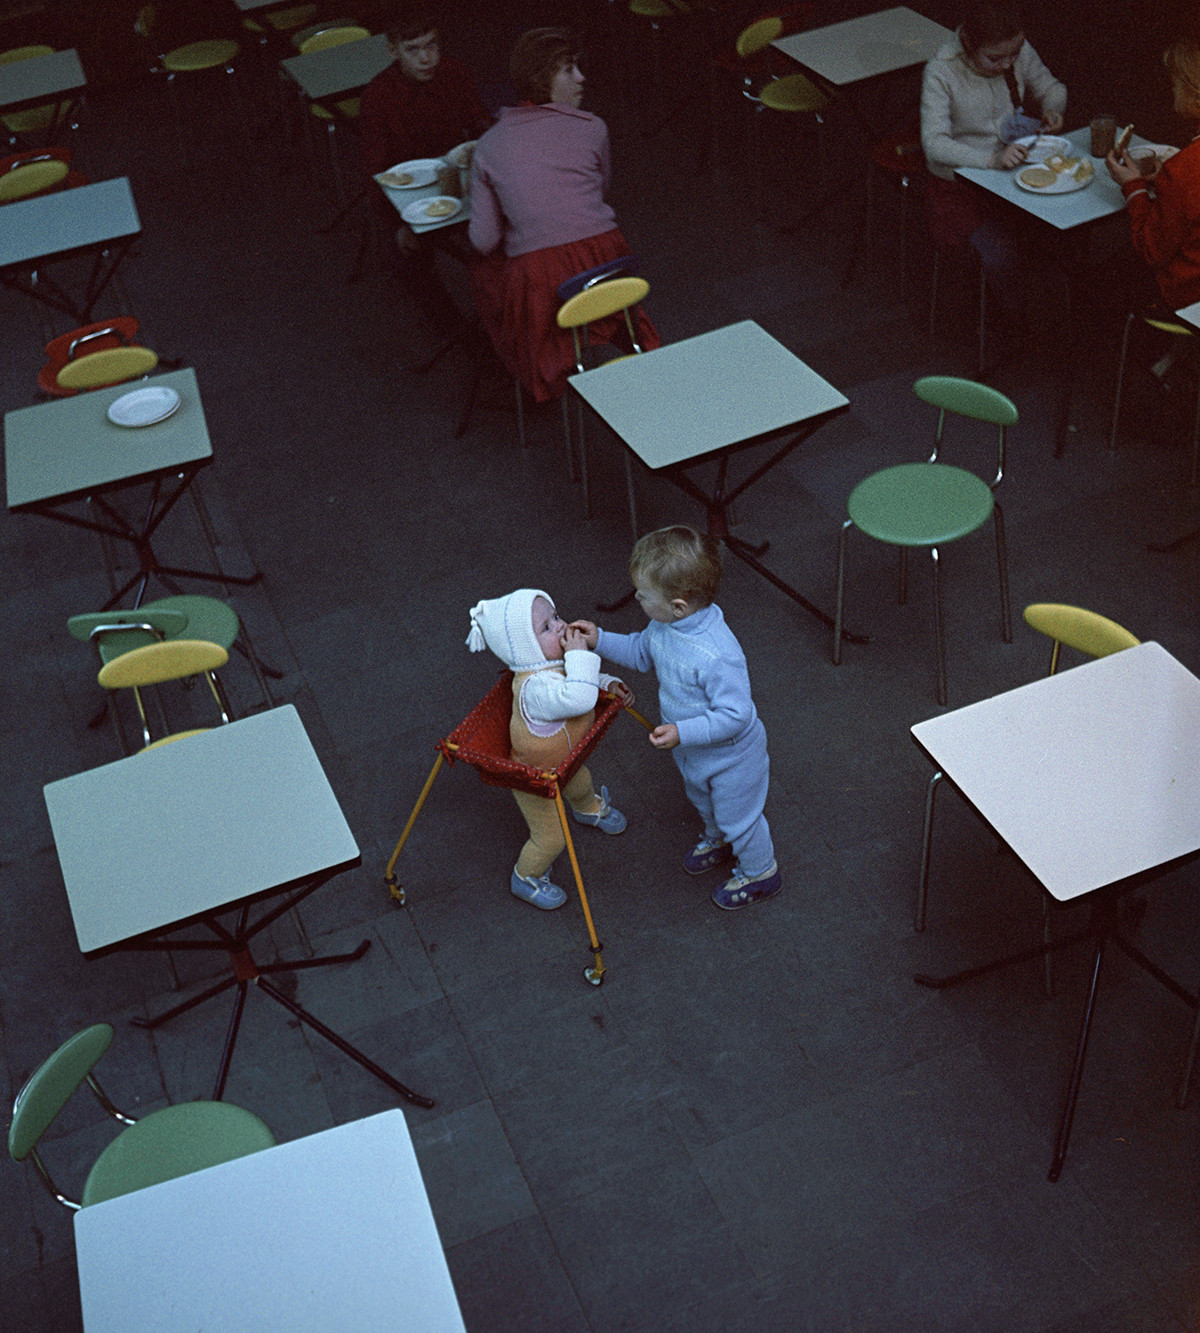 Children in a Moscow cafe.